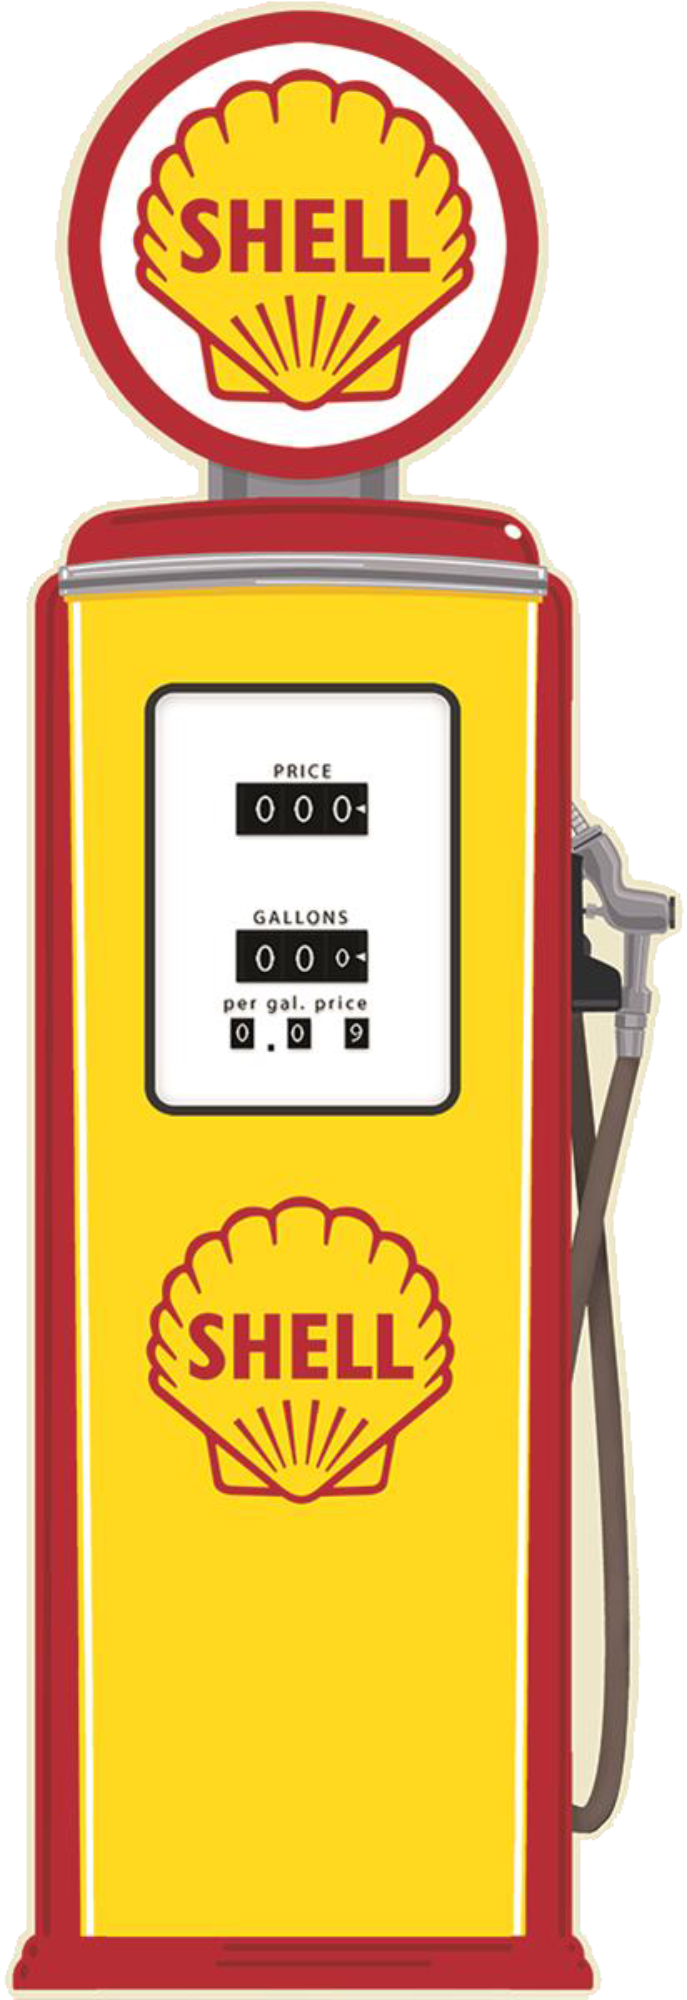 Retro Shell gasoline pump tin sign in bright yellow with the iconic Shell logo.